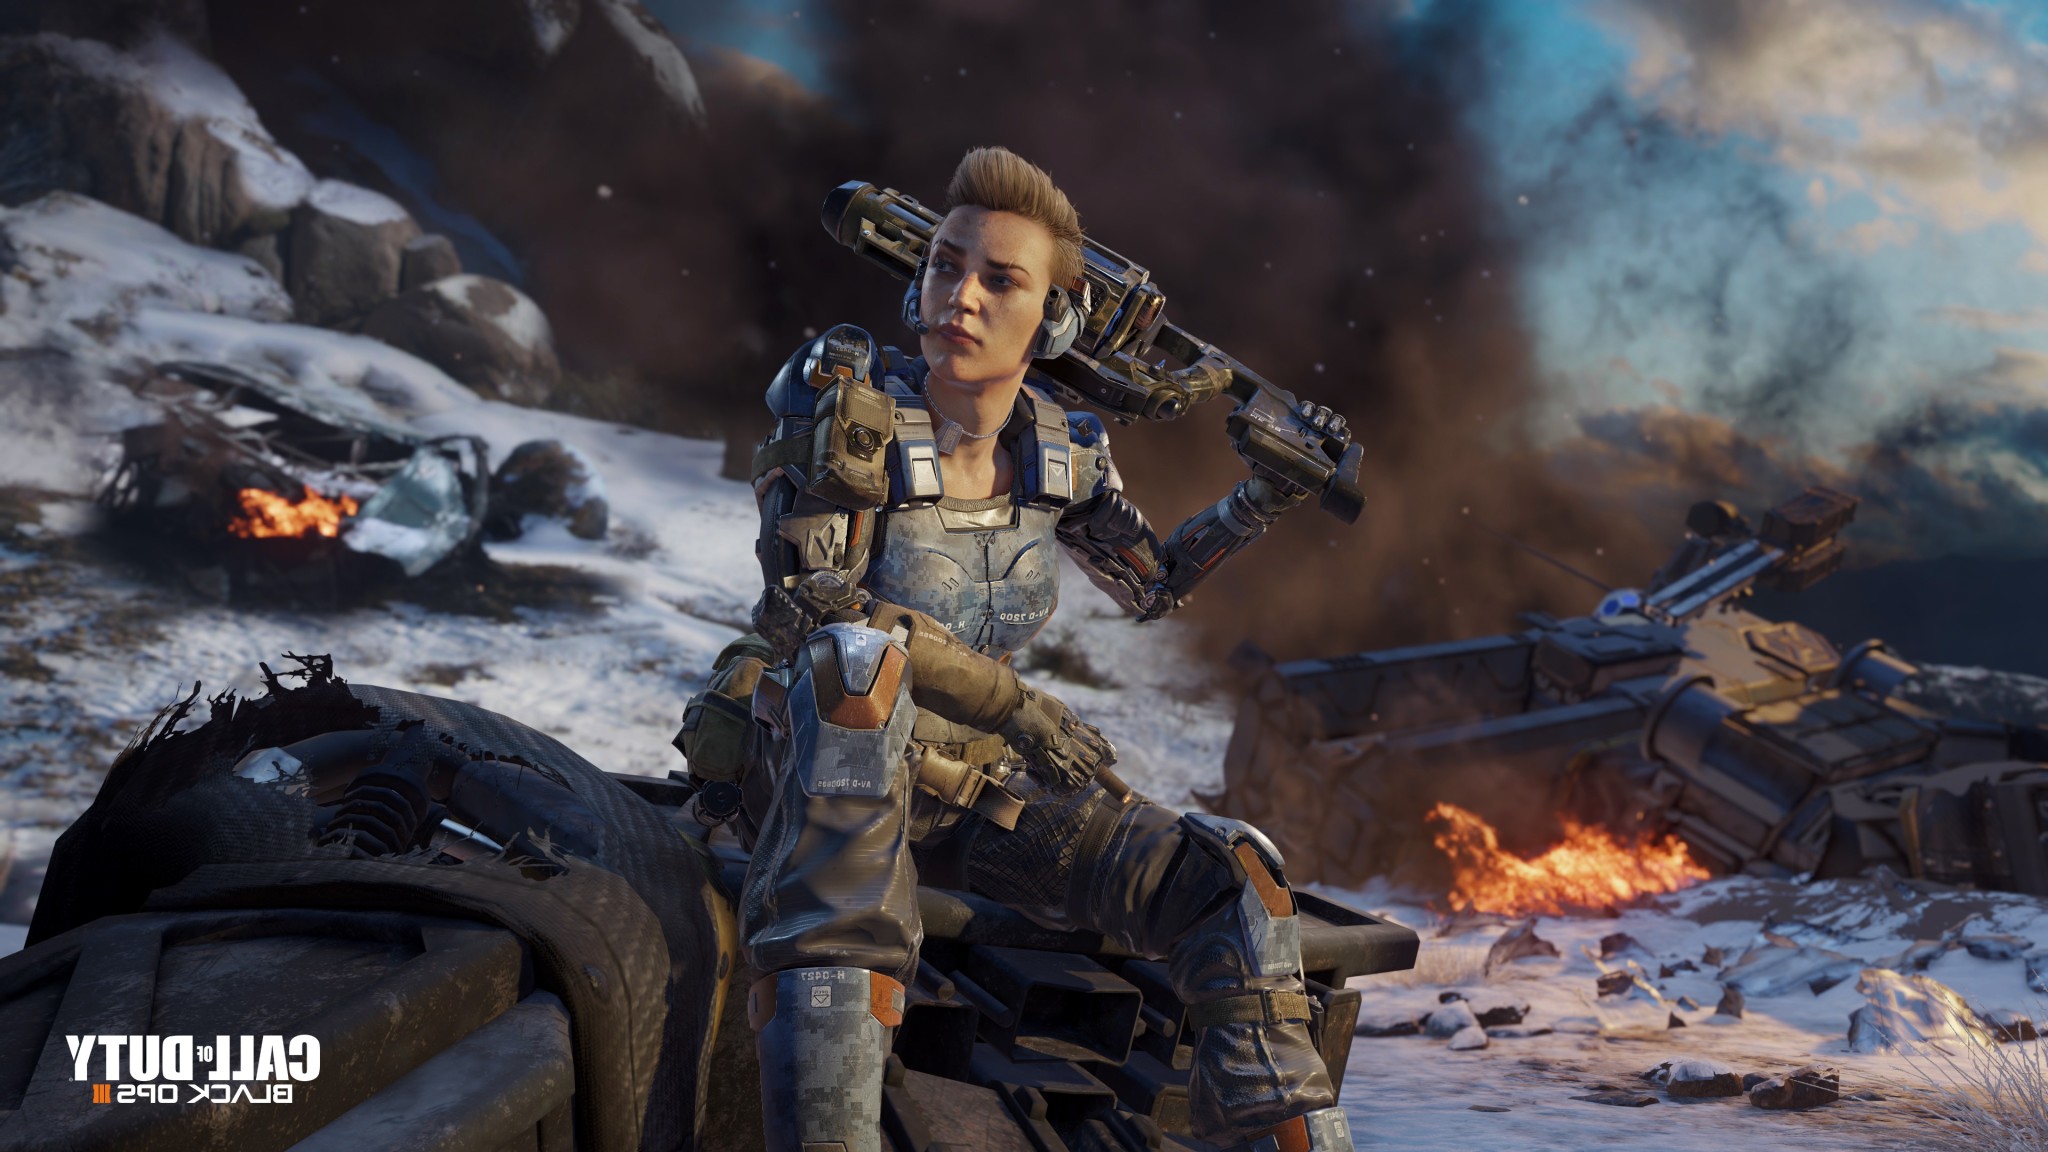 wallpapers de call of duty black ops 3,action adventure game,pc game,cg artwork,movie,strategy video game